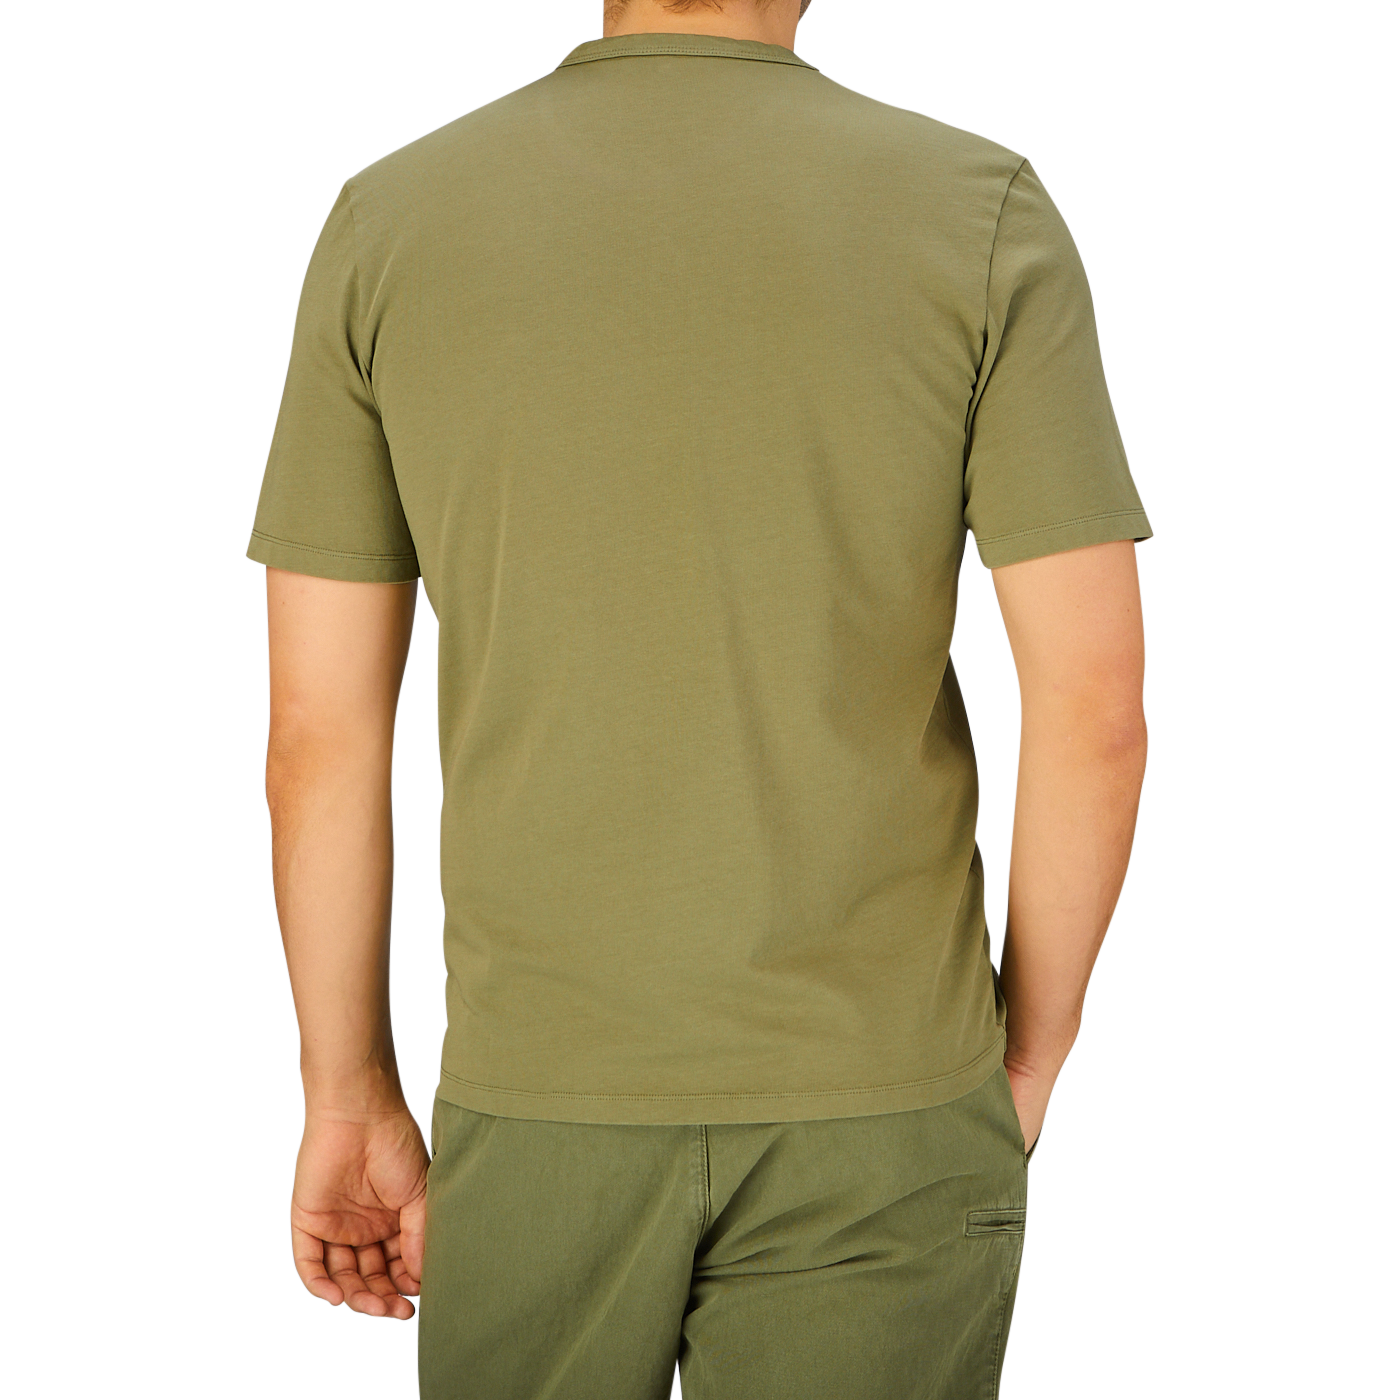 Man standing with his back facing the camera, wearing a plain olive green Tela Genova Green Heavy Organic Cotton T-Shirt and matching pants.